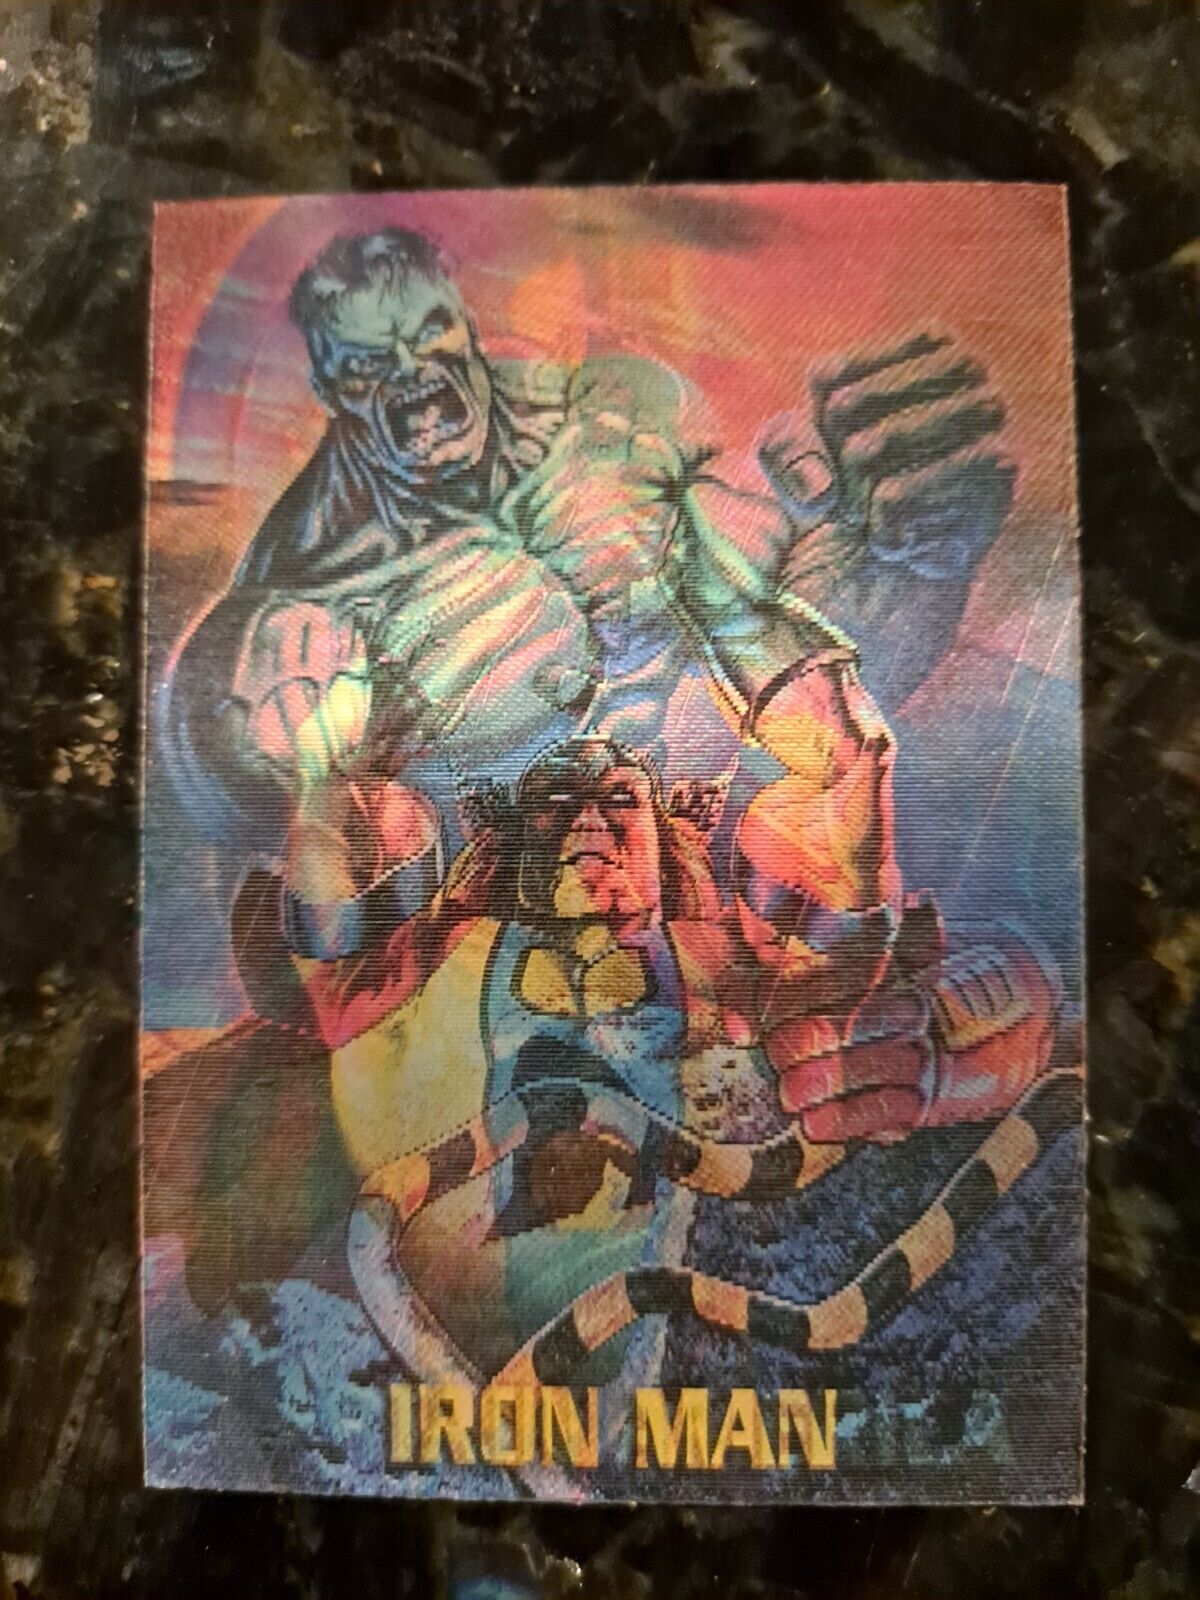 1995 Marvel Masterpieces Mirage Avengers 1 of 2 Insert Card Excellent Condition